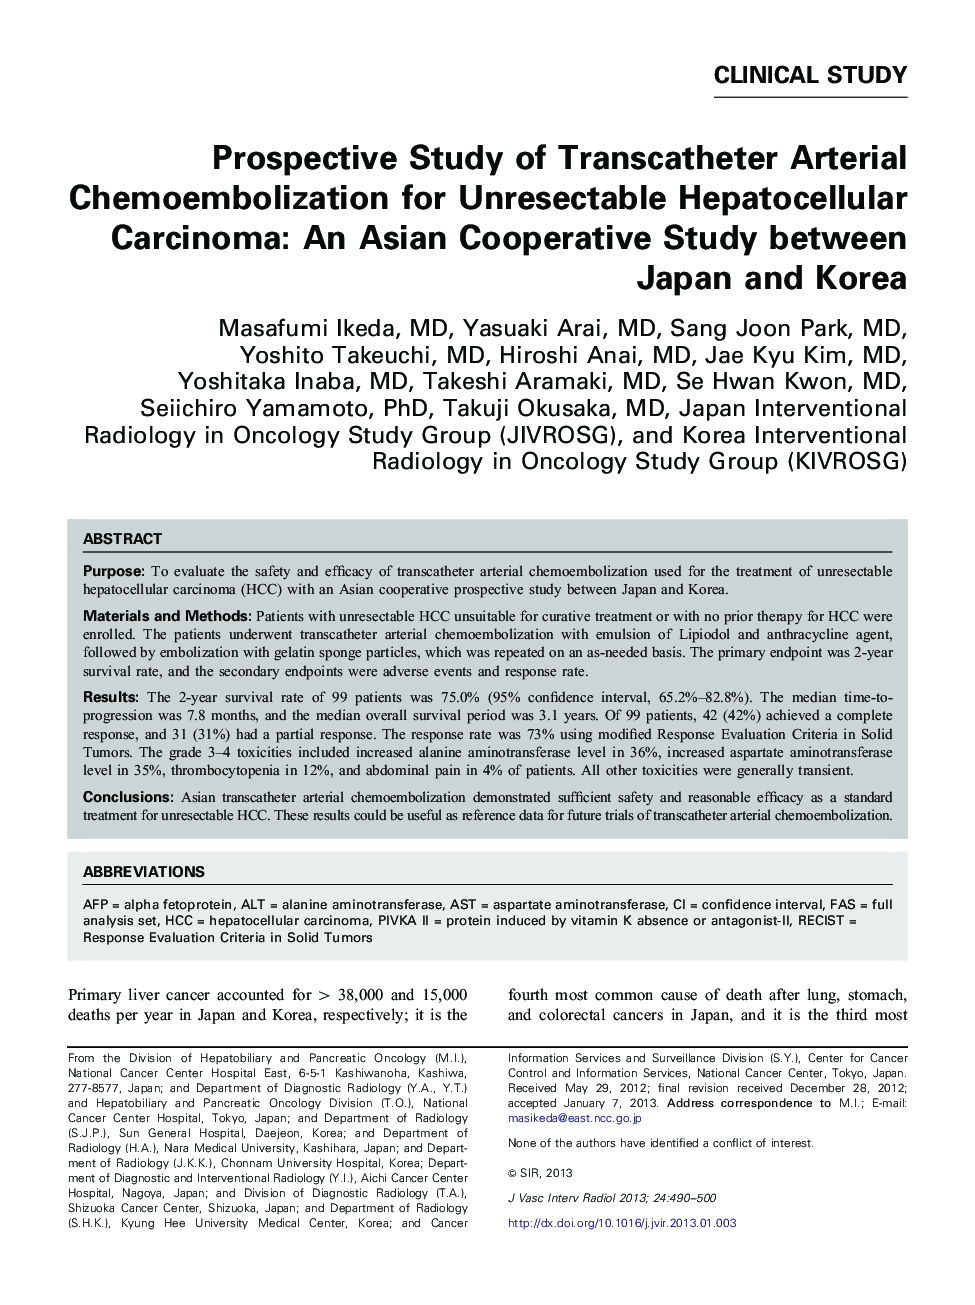 Prospective Study of Transcatheter Arterial Chemoembolization for Unresectable Hepatocellular Carcinoma: An Asian Cooperative Study between Japan and Korea